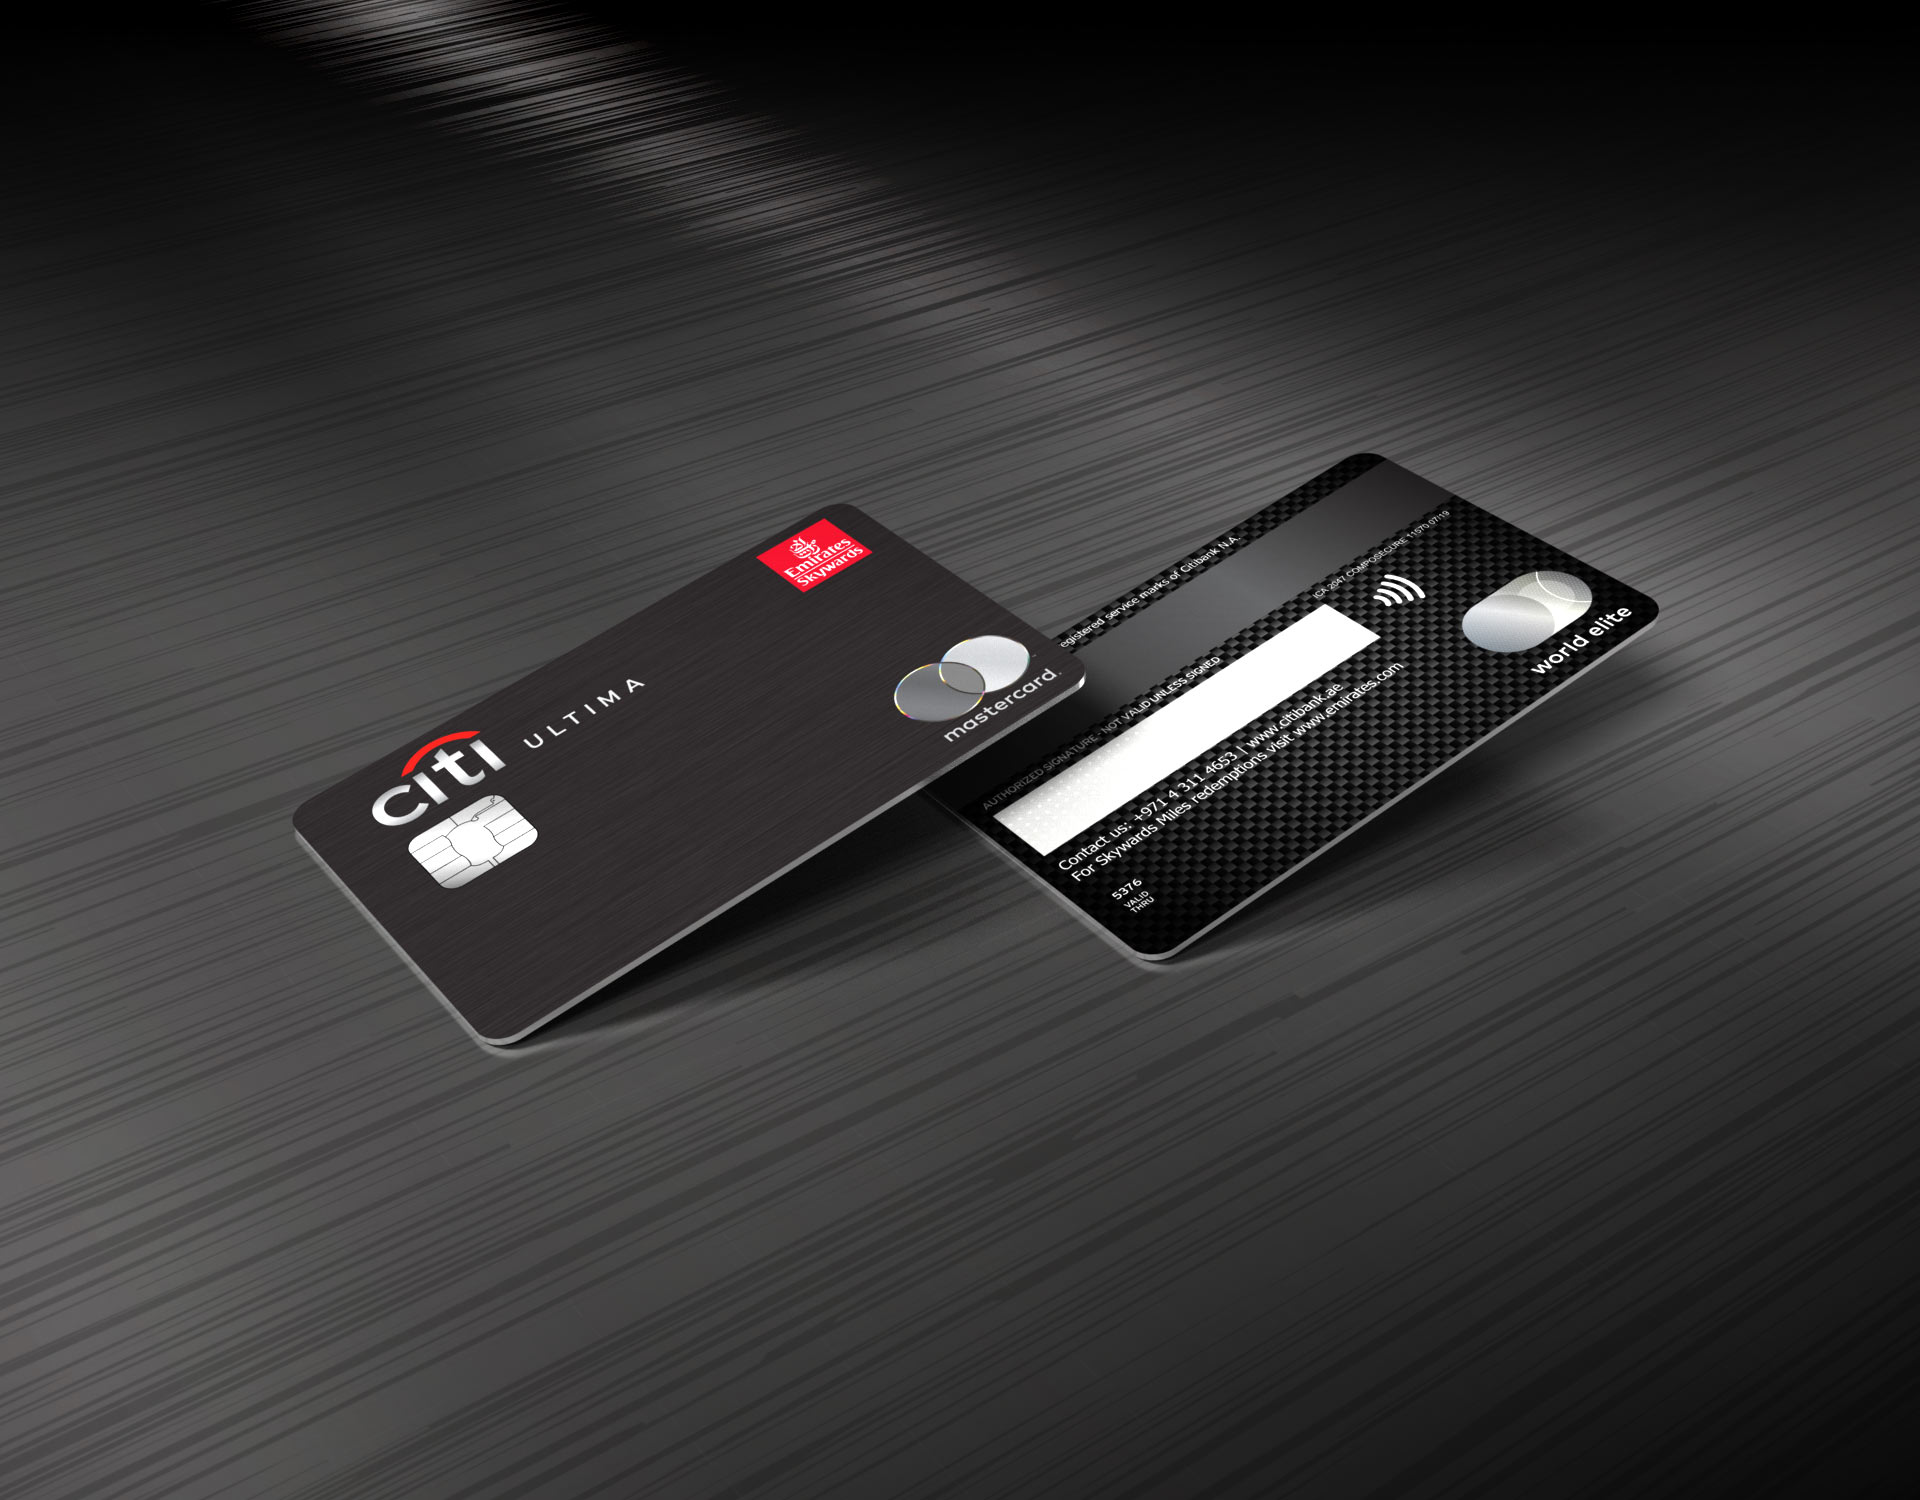 IDEMIA Launches The Middle East’s First Full Metal Dual Interface Payment Card